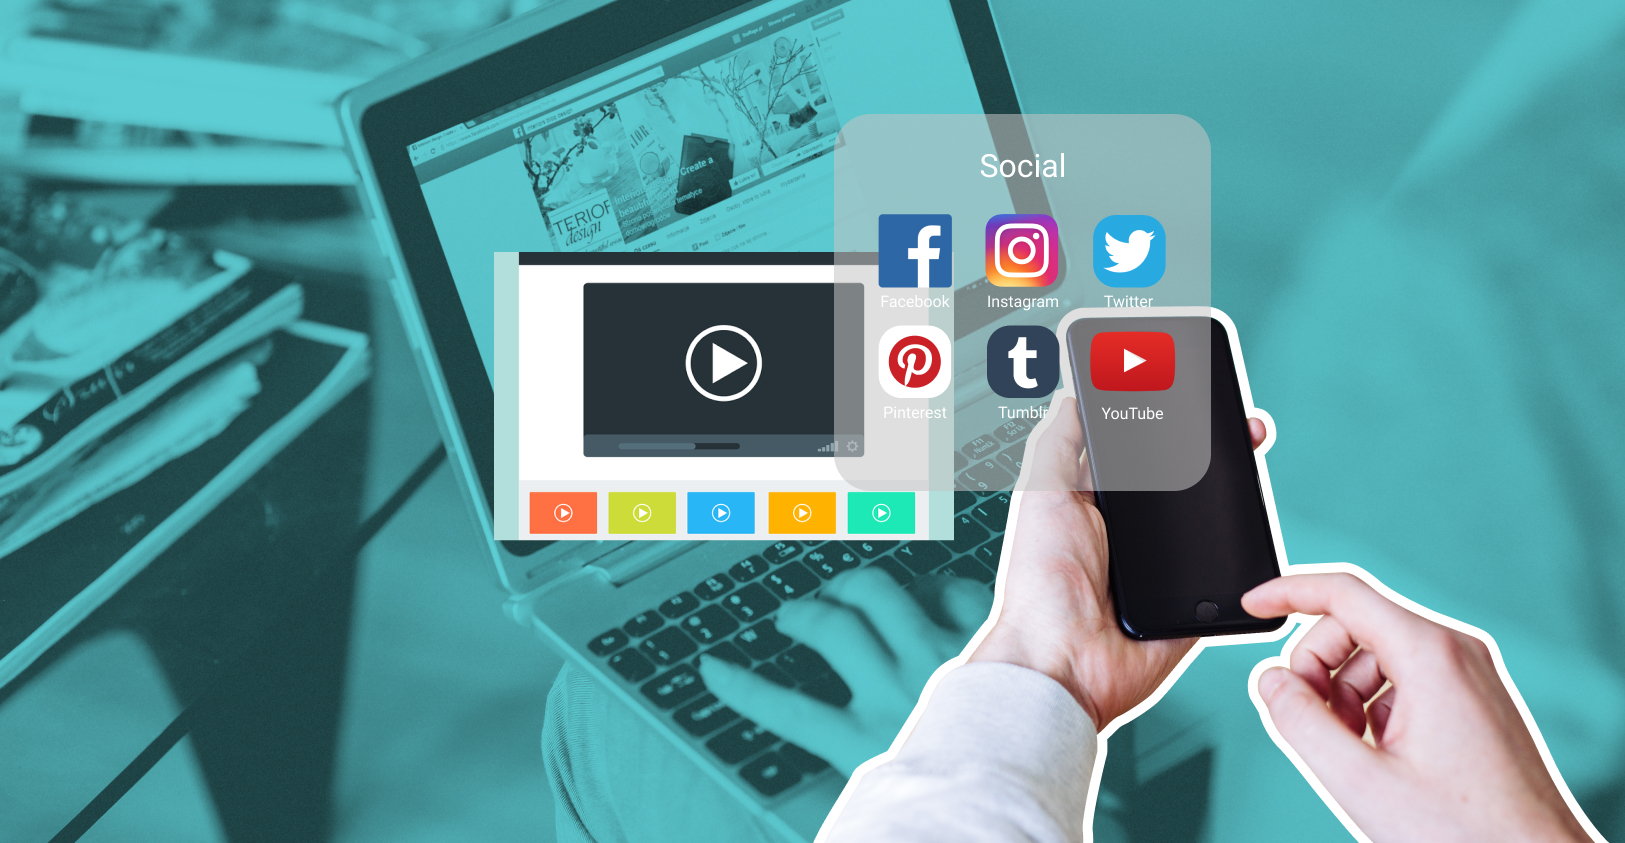 Growth Rocket Social Media Marketing Trends That Will Dominate 2019